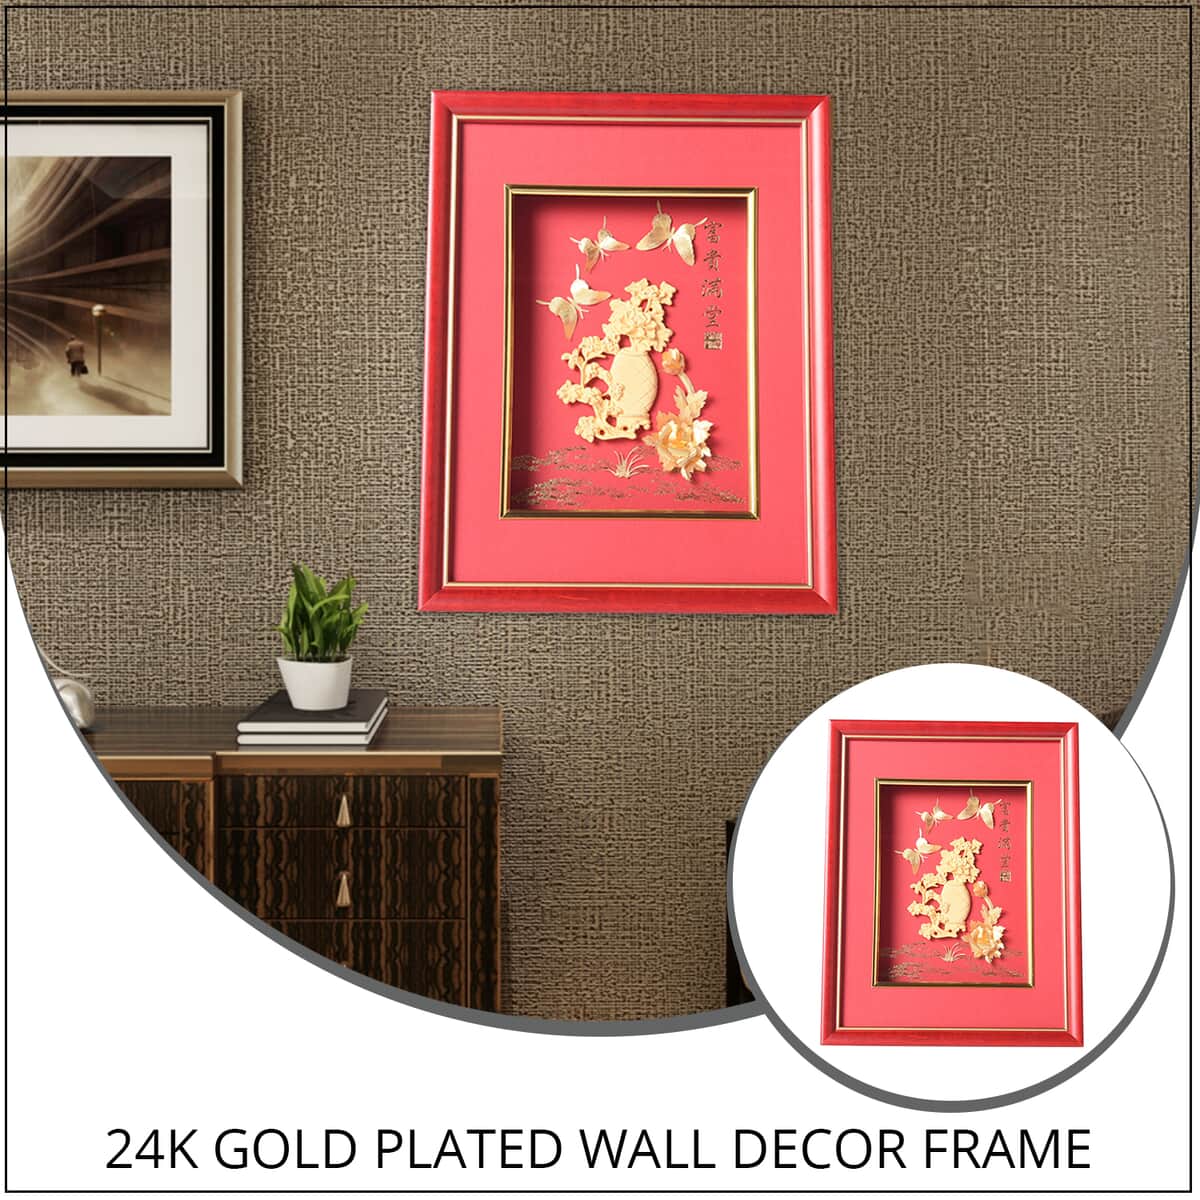 24K Gold Plated Layer Vase Exhibit Wall Decor Frame image number 1